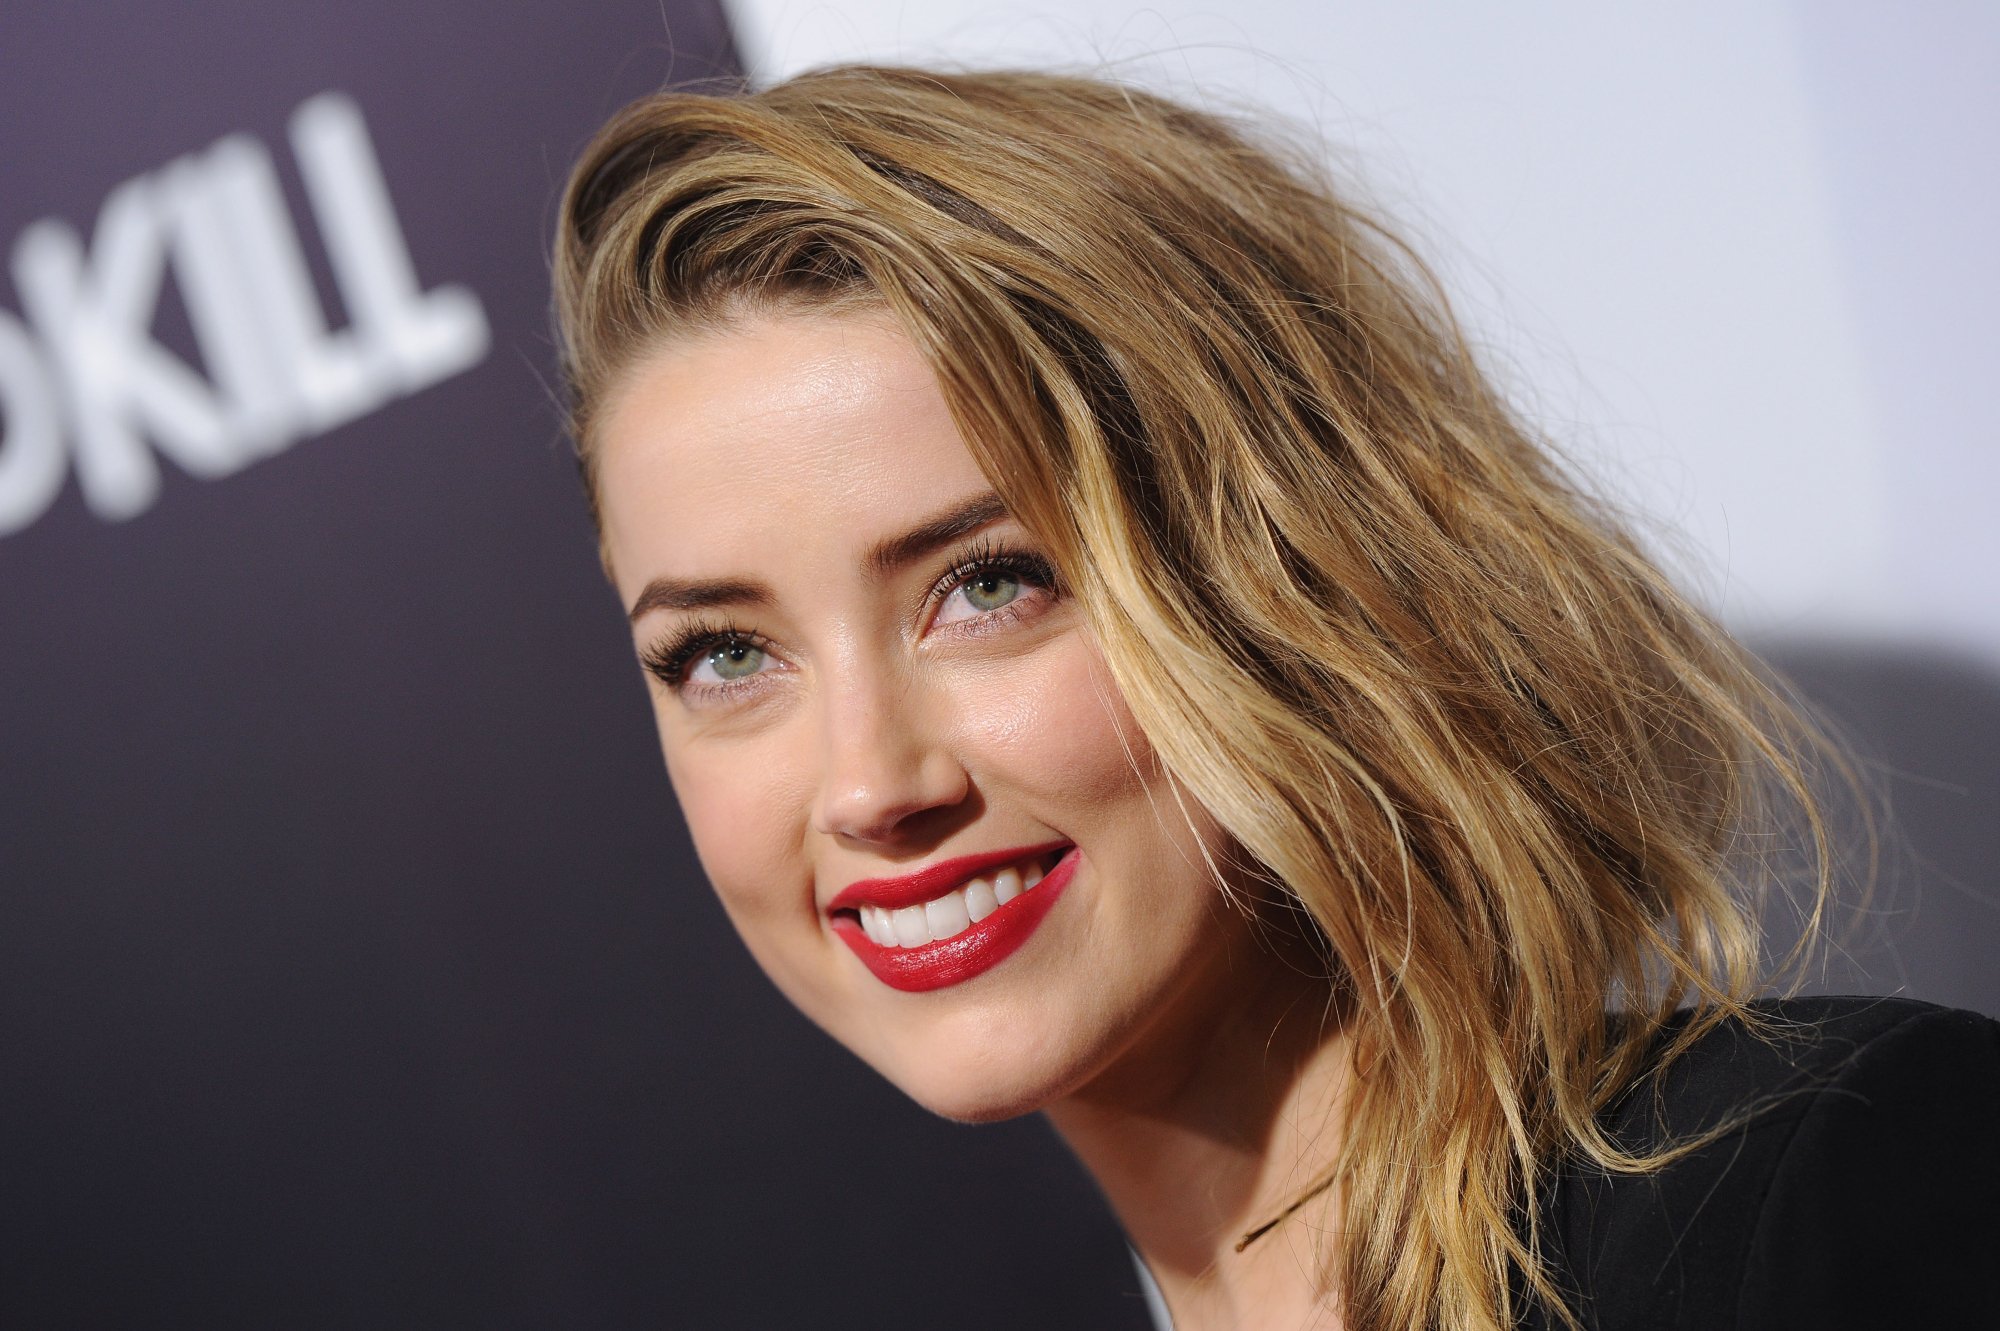 '3 Days to Kill' actor Amber Heard, who starred alongside Kevin Costner. She smiles with red lipstick on in front of a step and repeat.